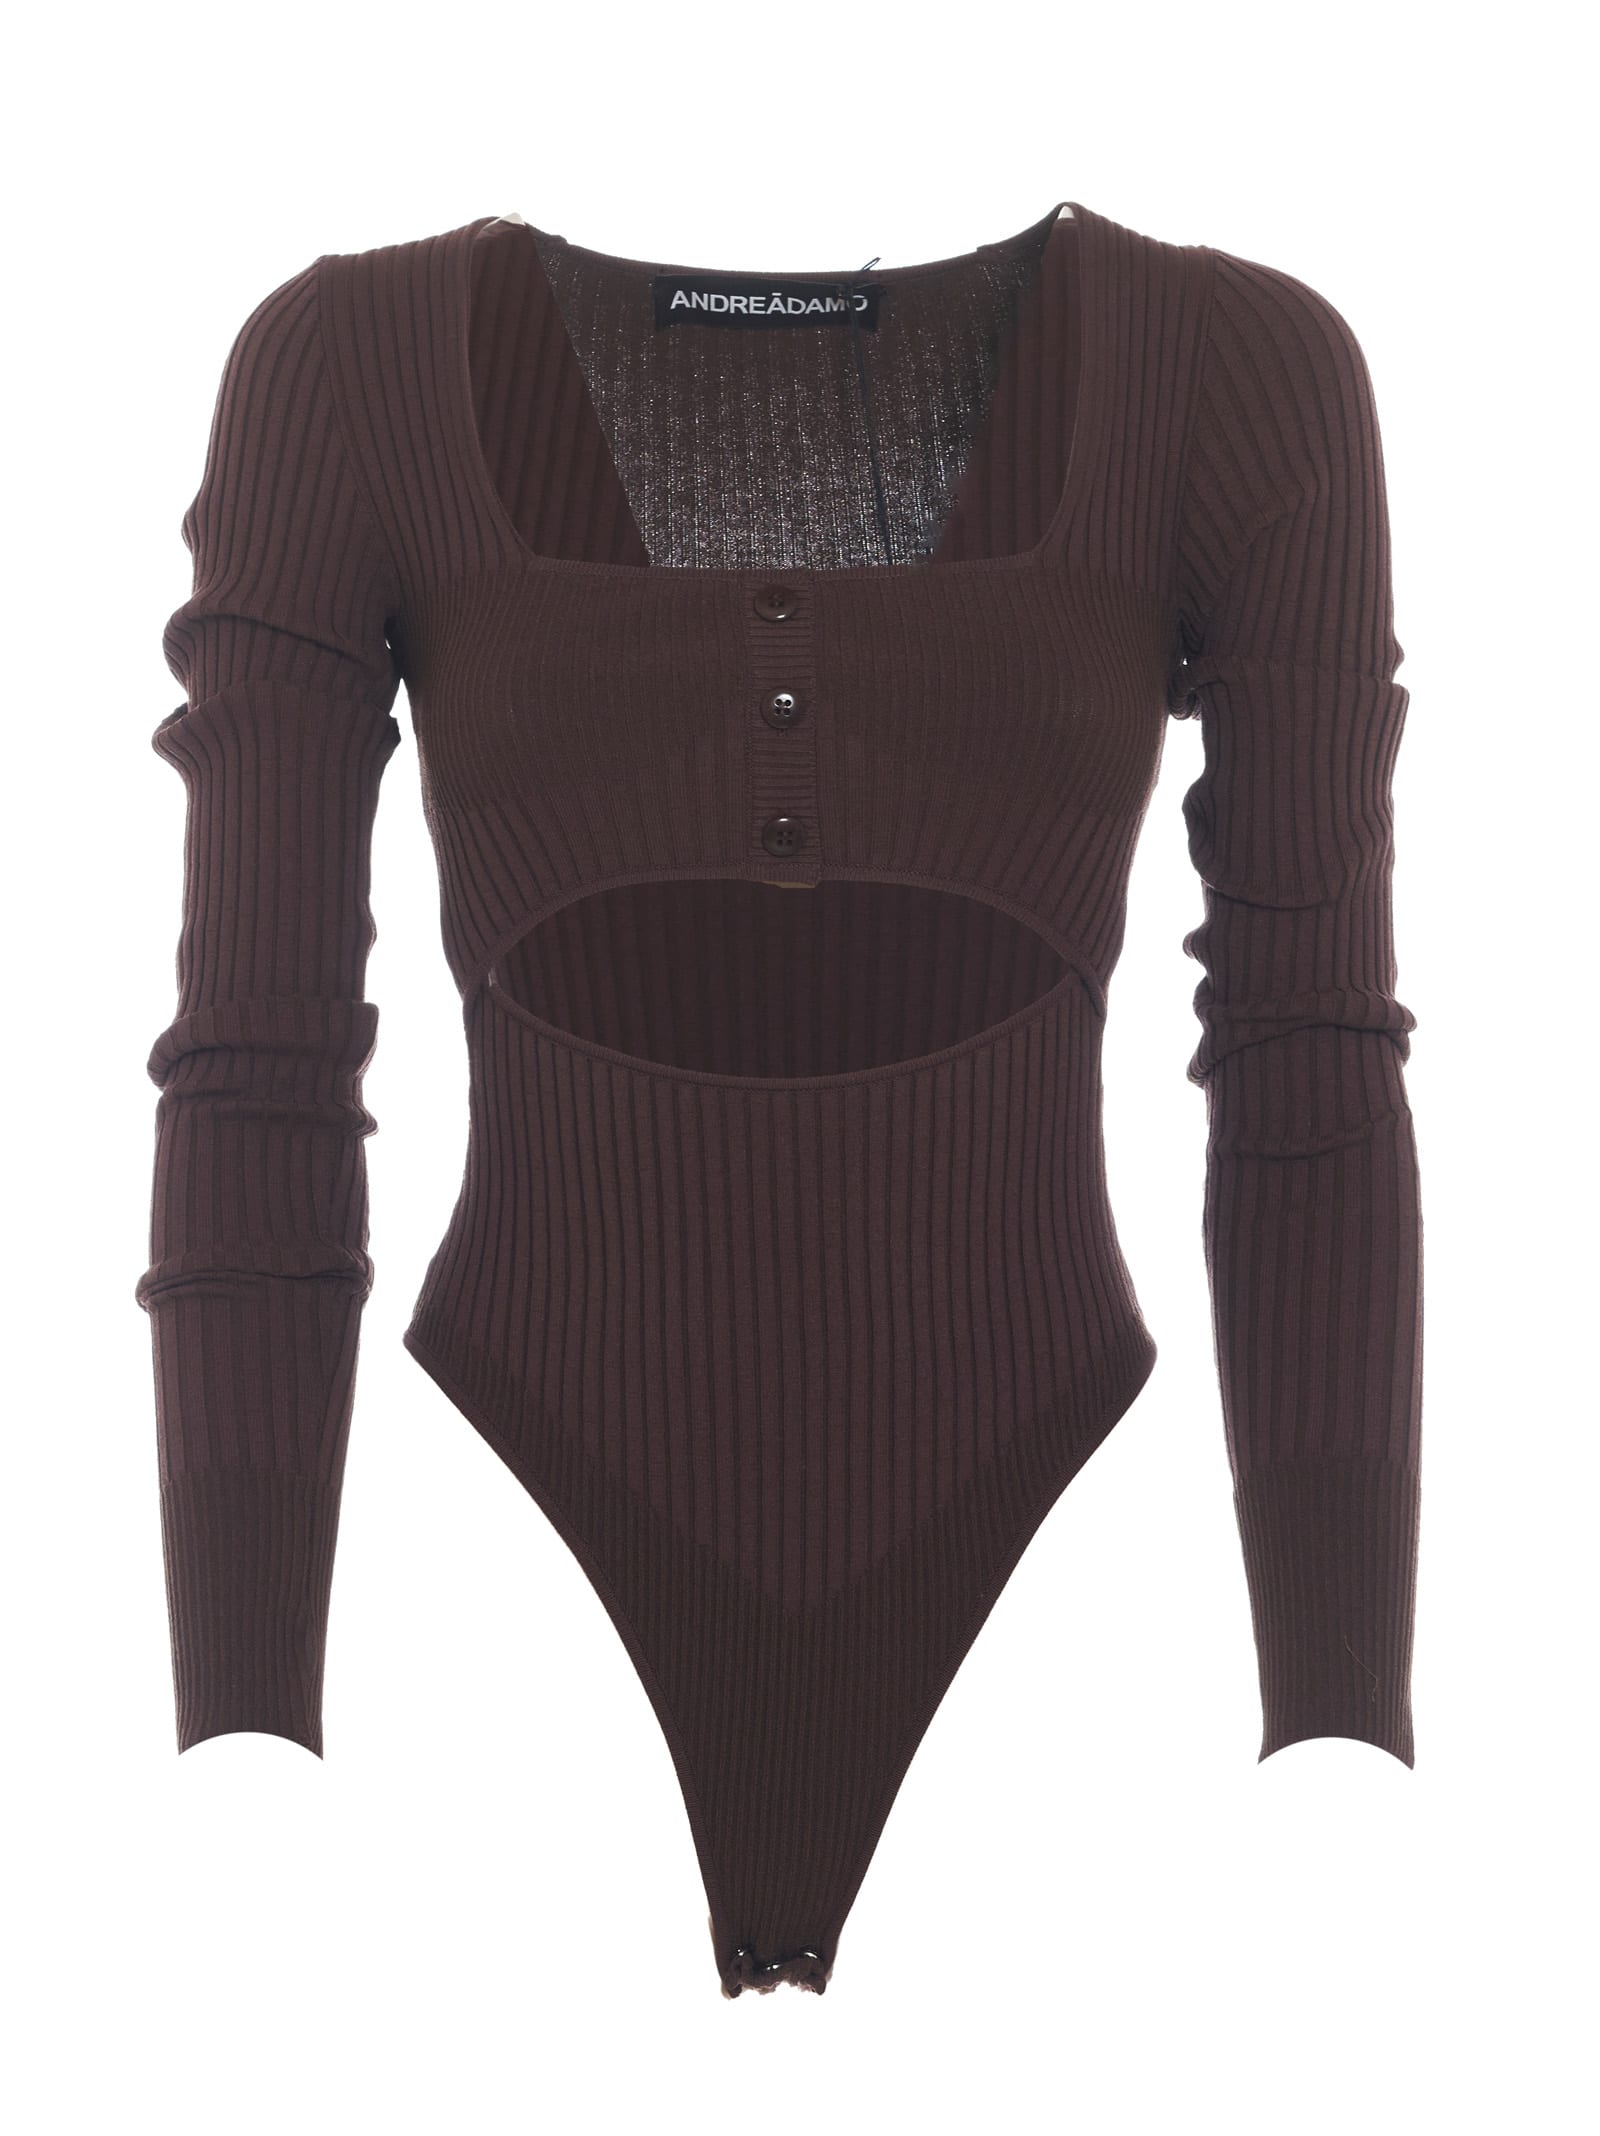 ANDREADAMO Ribbed Knit Body With Layers Cut Out